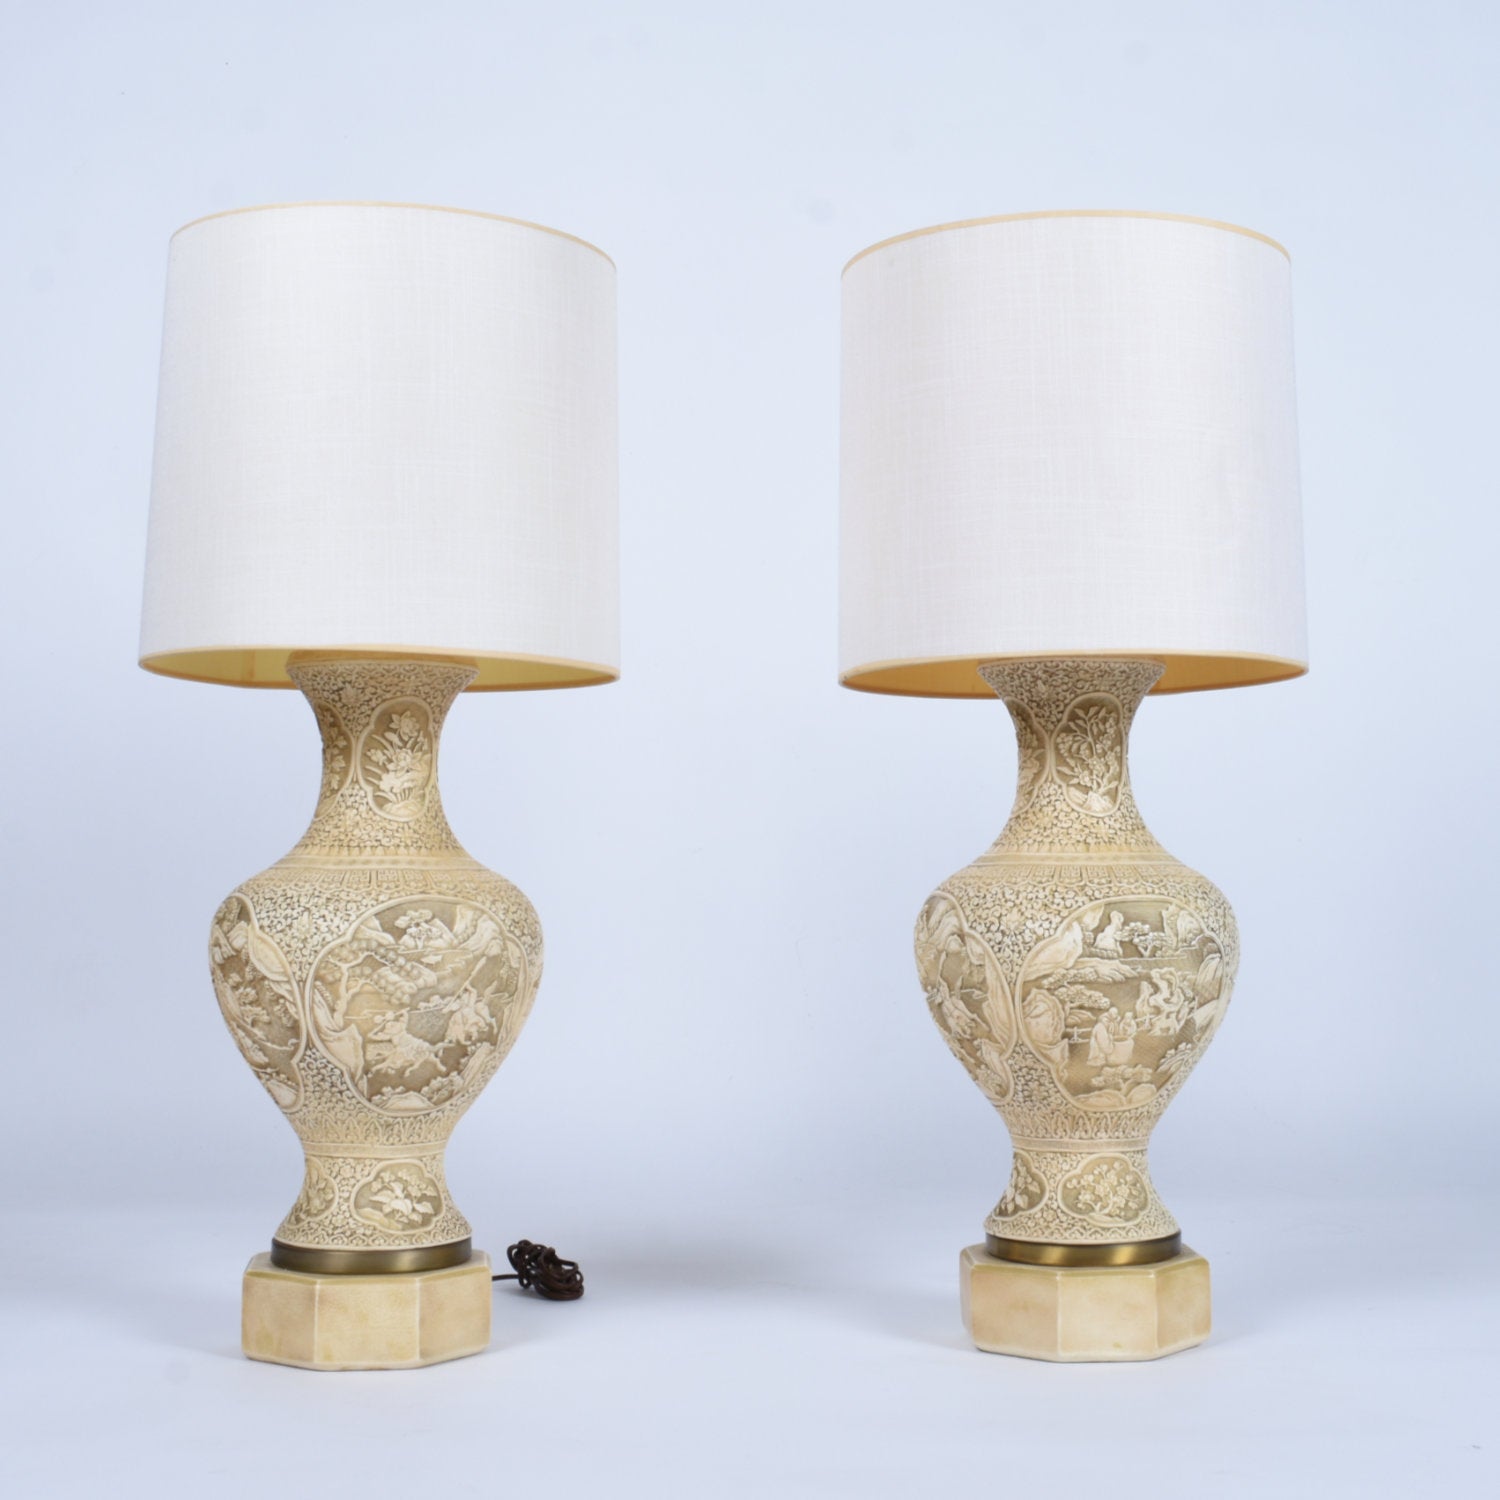 A savory patina enriches the bone colored vintage carved Asian chalkware lamps. Each bit of these lamps were ornately decorated with carved Oriental botanical and figural elements. A series of medallions decorate the mid-section, depicting scenes